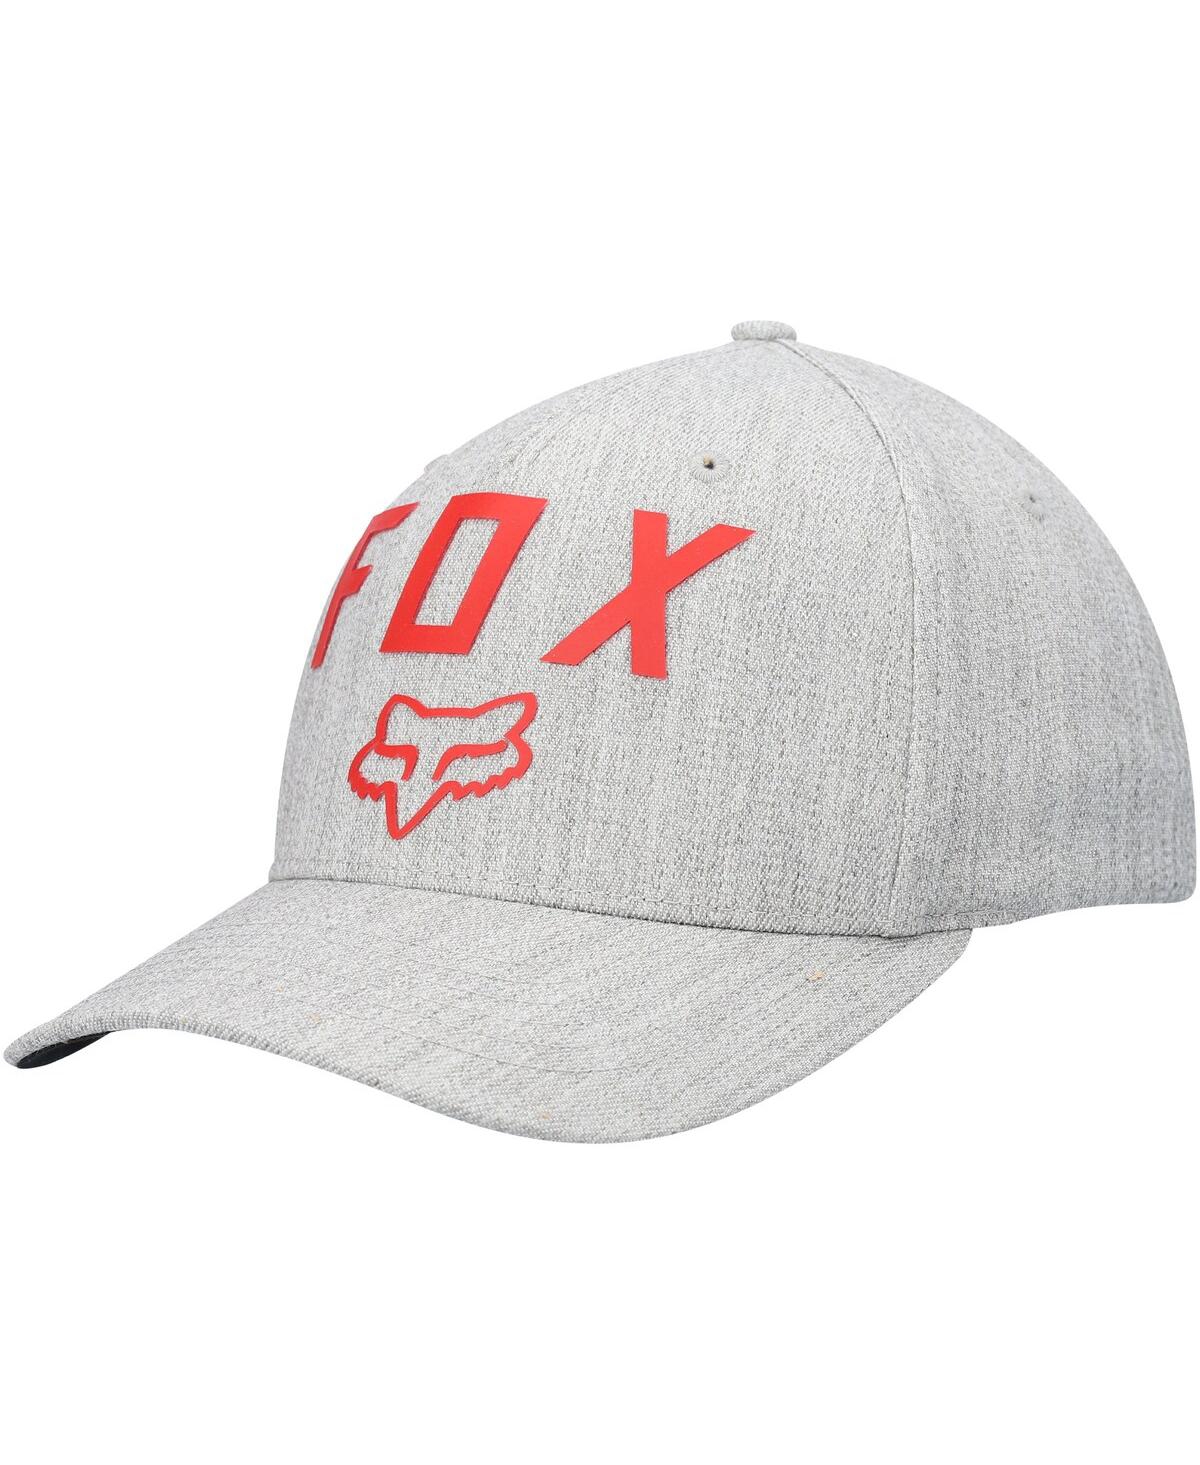 Men's Heathered Gray Number Two 2.0 Flex Hat - Heathered Gray